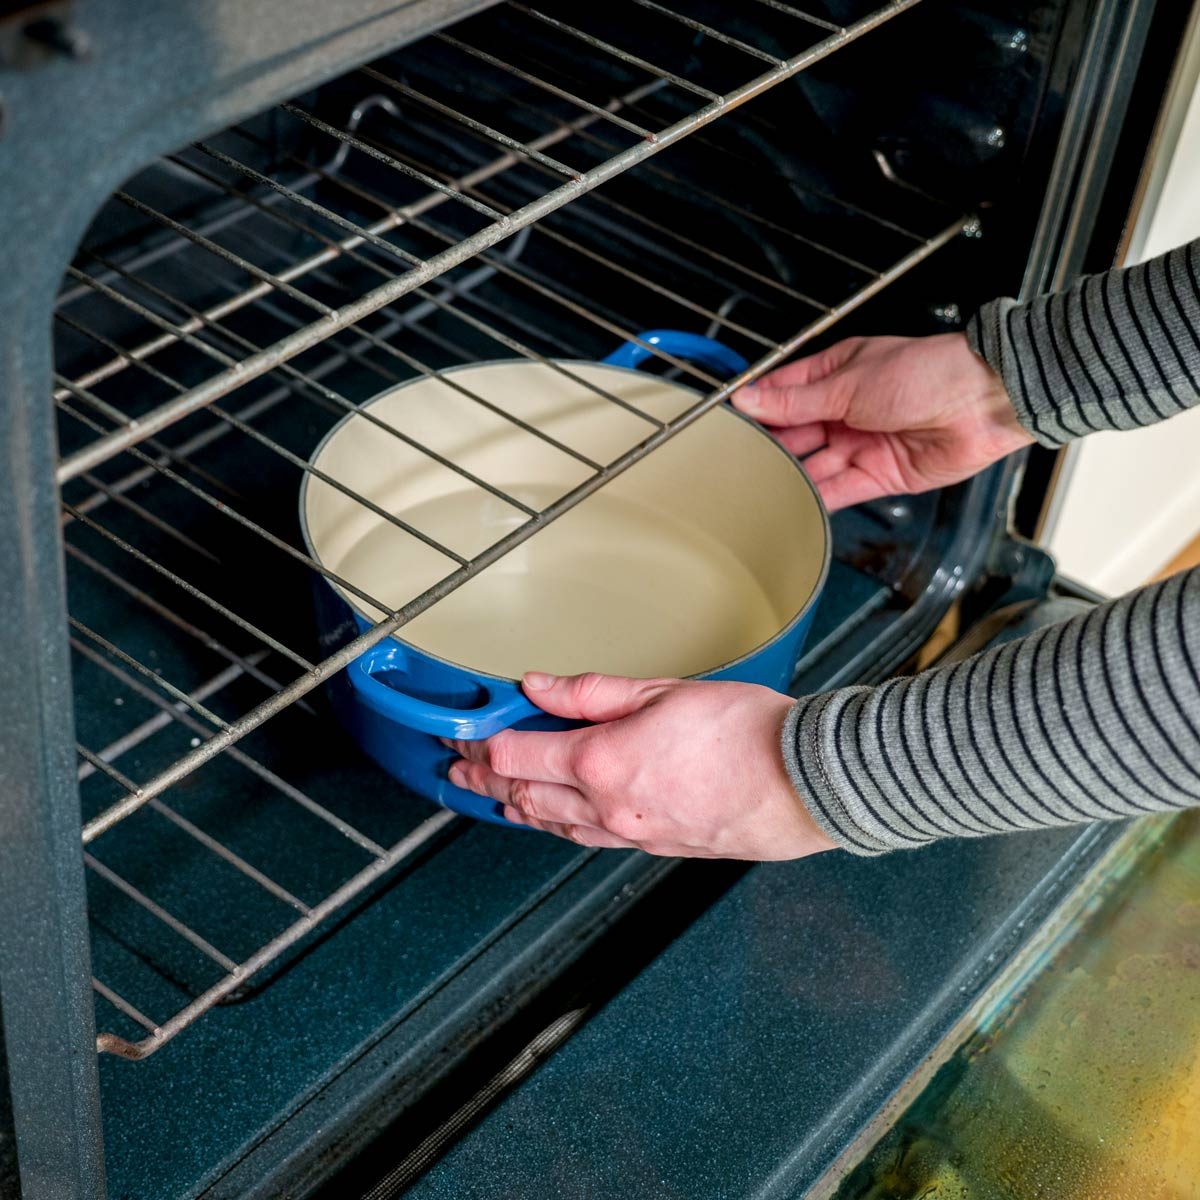 Steam Clean Ovens: How to Clean Your Oven With Steam